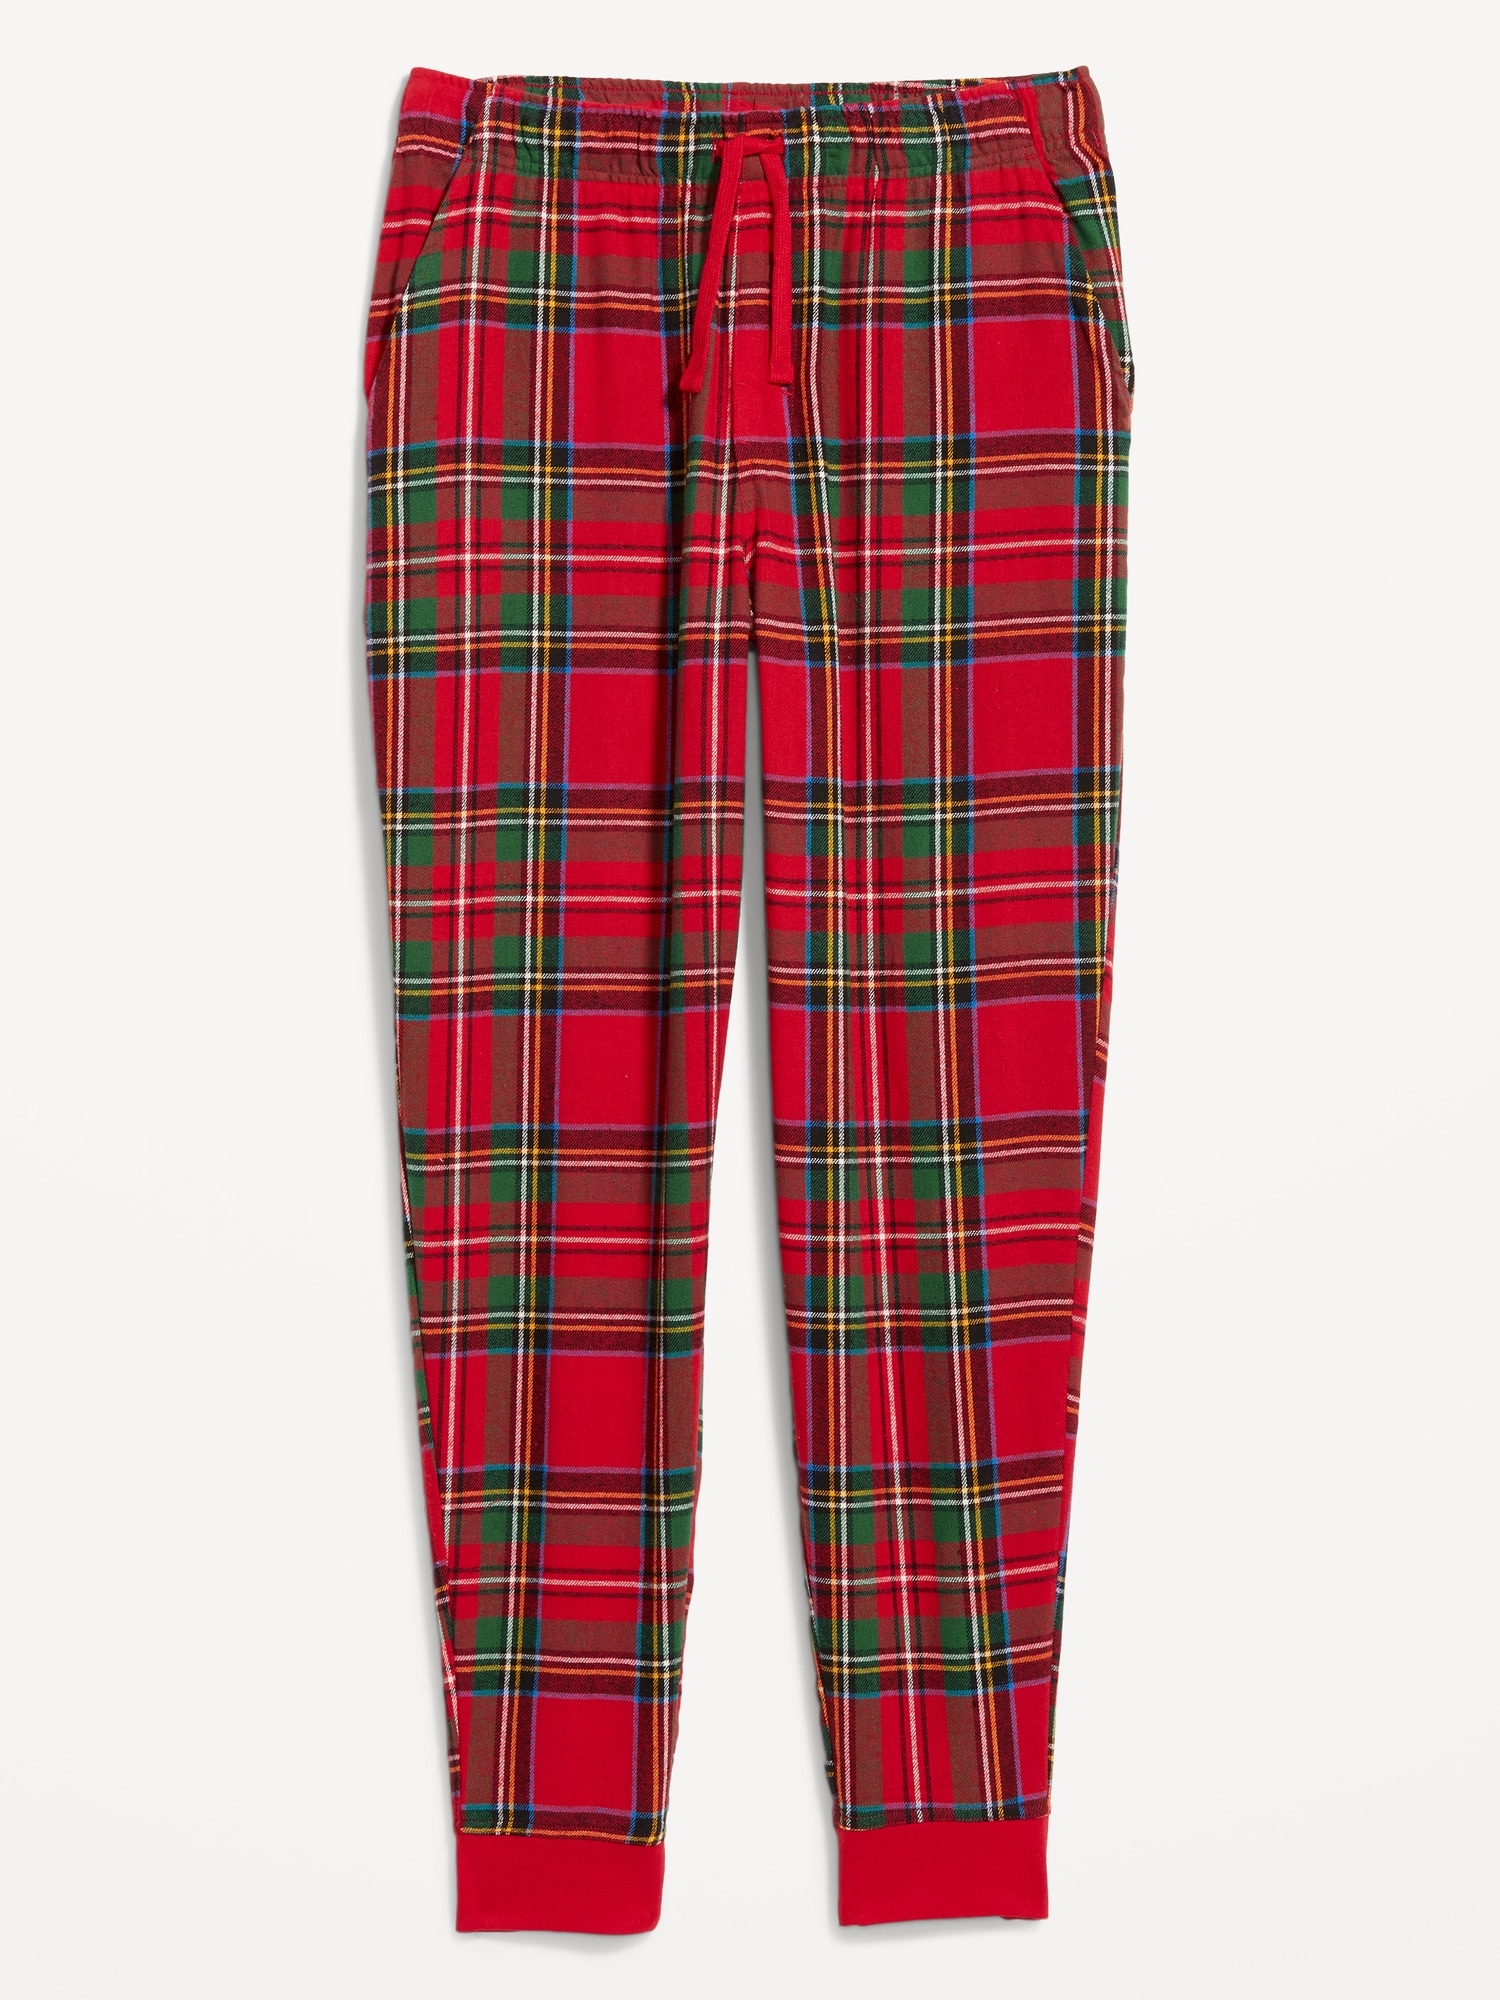 Flannel Jogger Pajama Pants | Old Navy